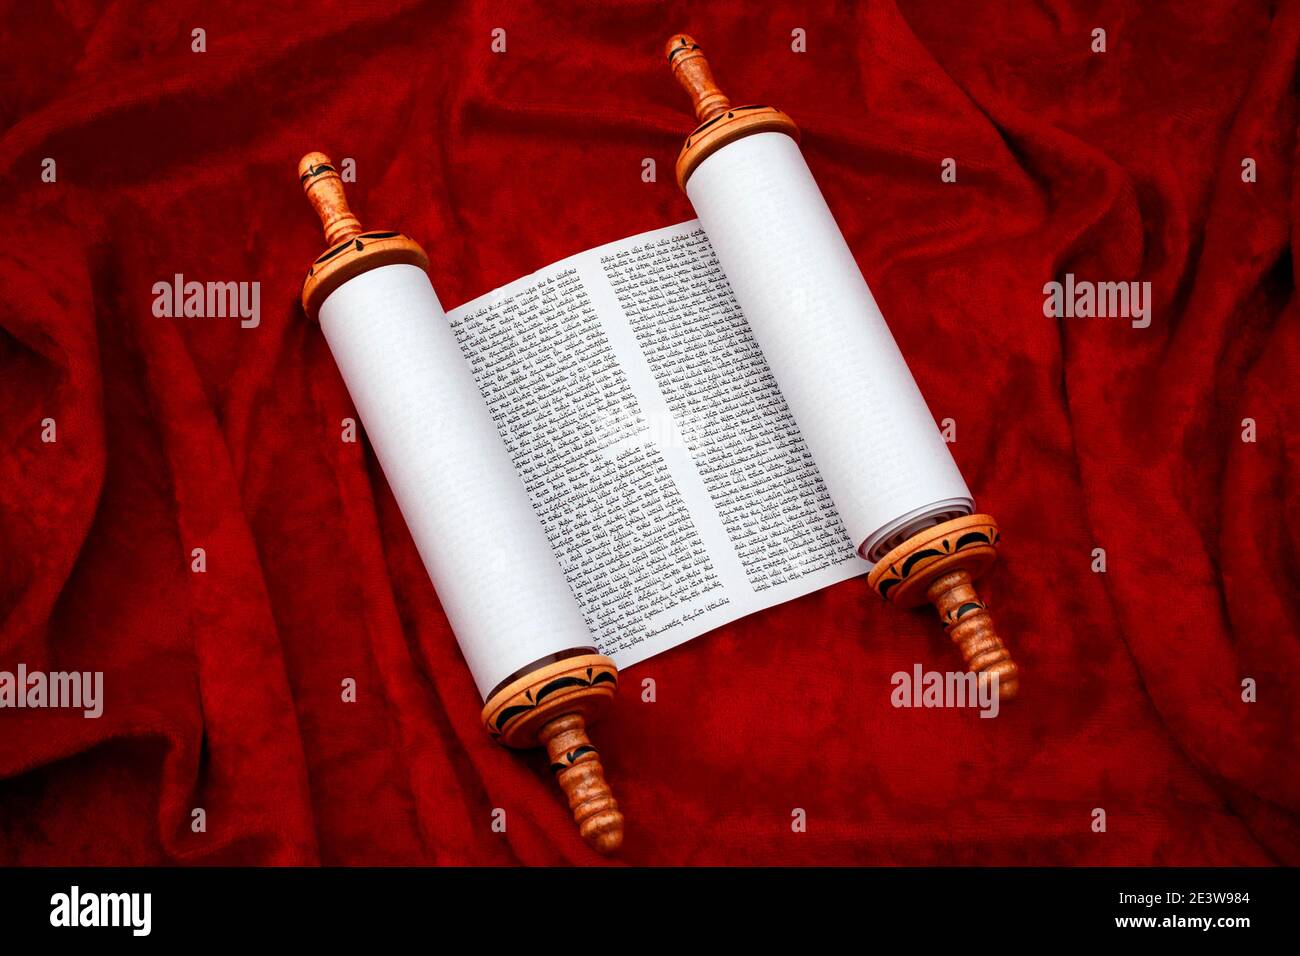 The Old Testament text, Jewish temple or synagogue, religious parchment scroll and the Judaic religion concept theme with the holy Torah open on red v Stock Photo